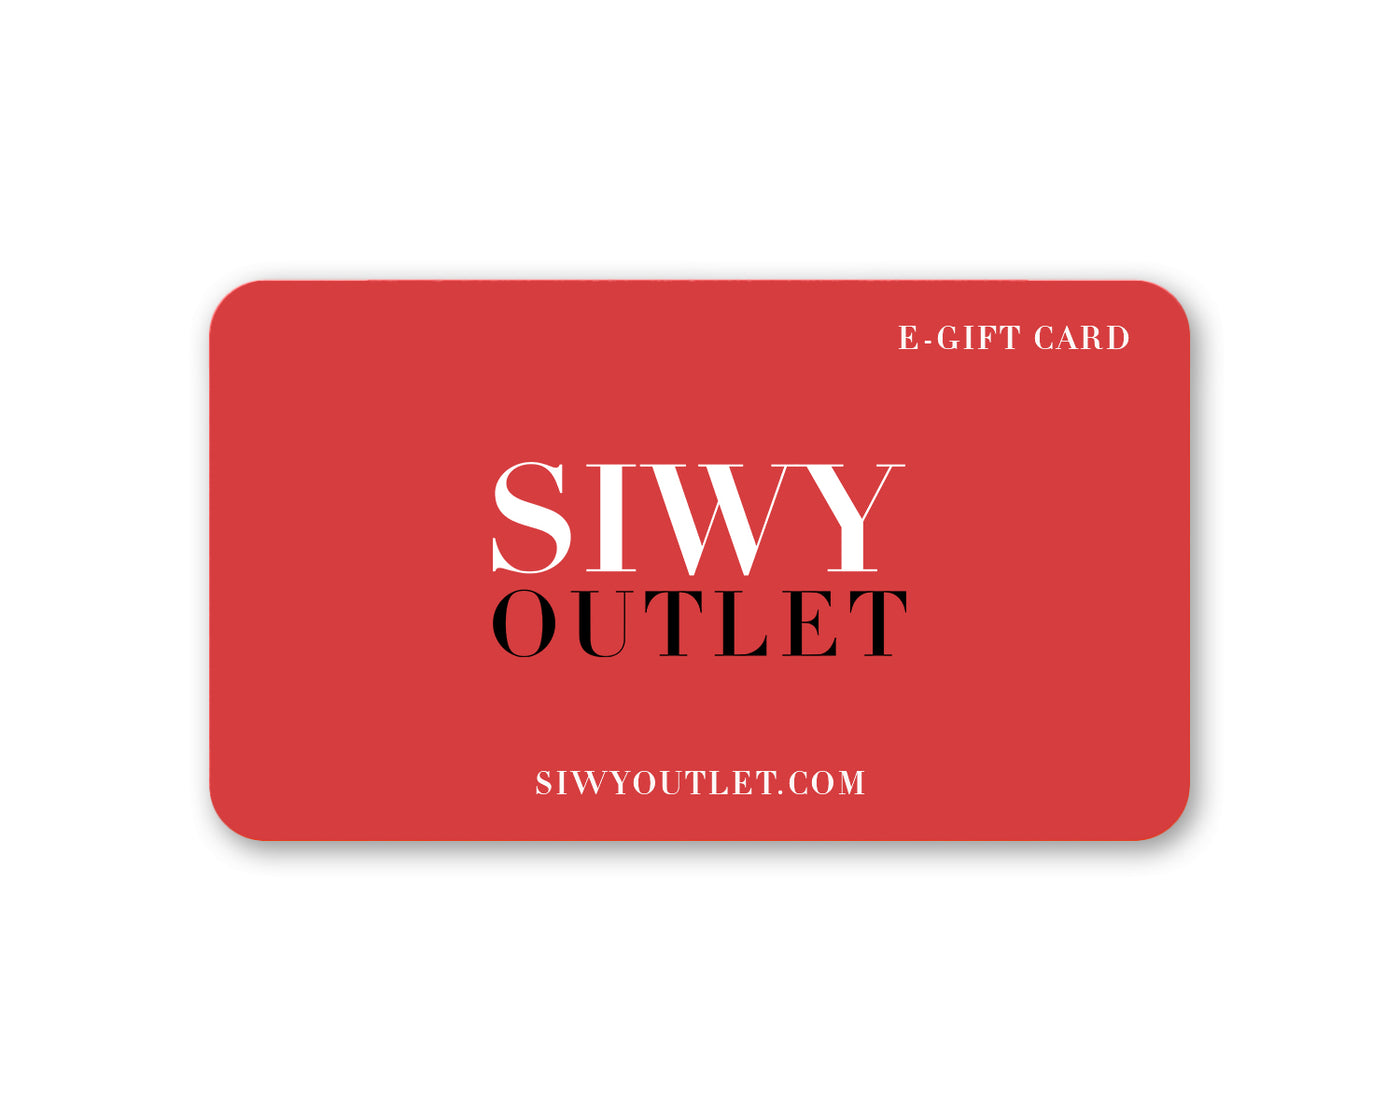 Siwy Outlet E-Gift Card